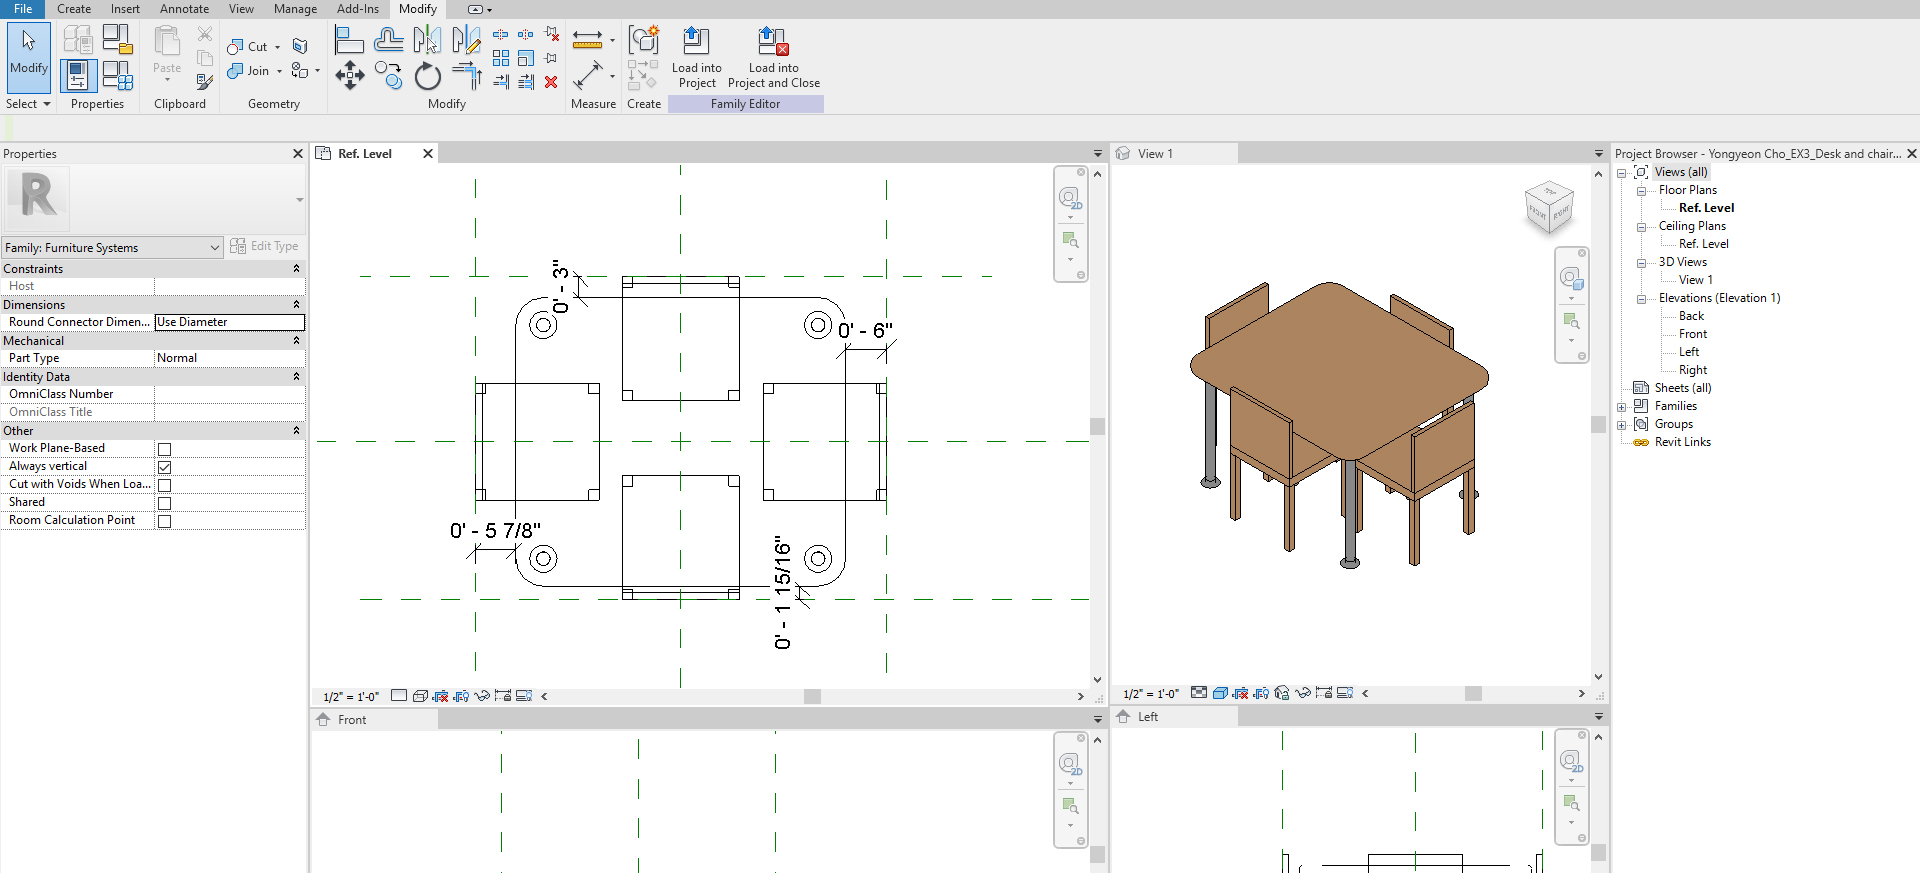 It indicates how to align the chairs and the table with reference planes, also set the dimension.